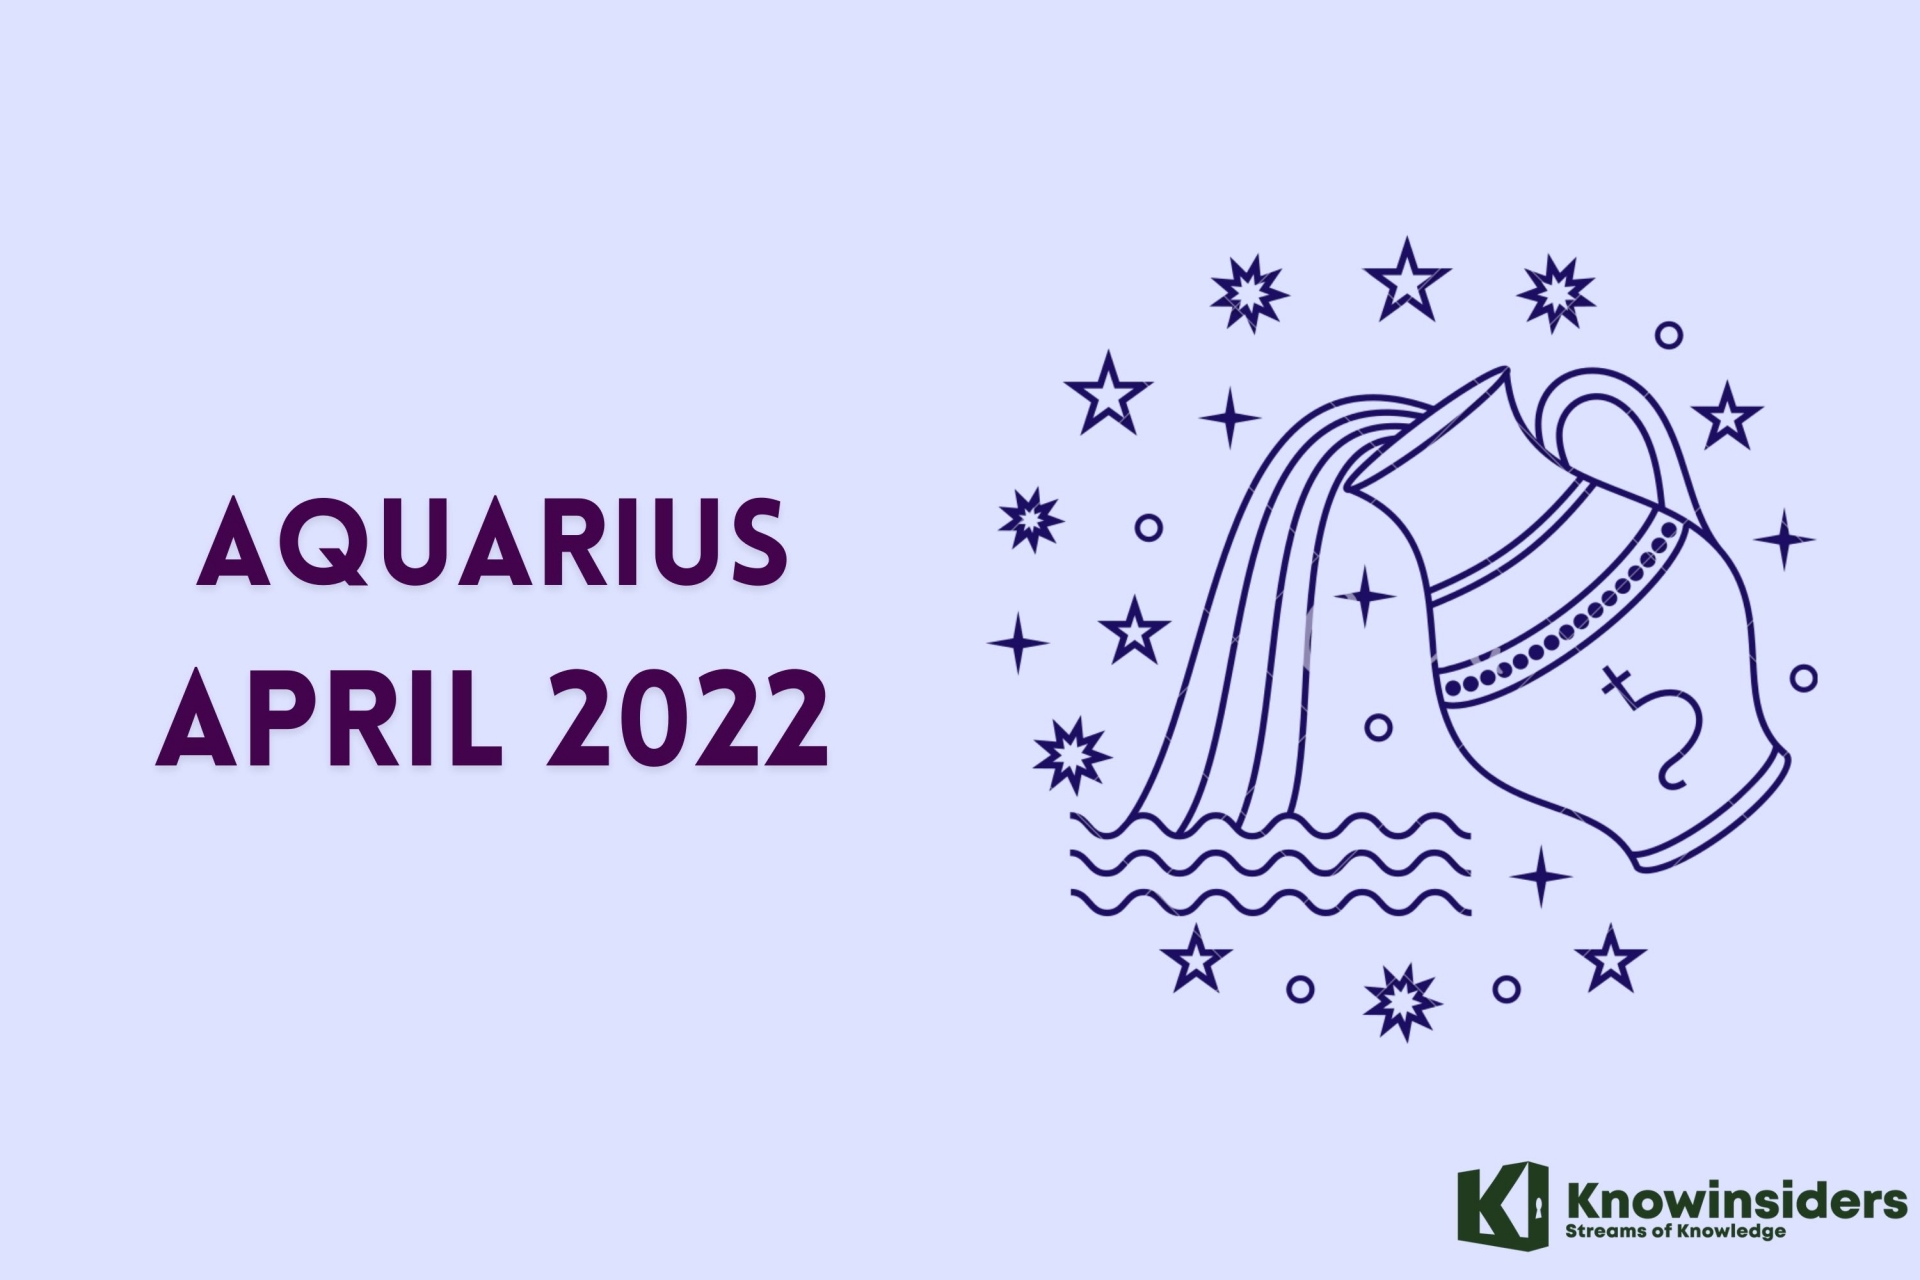 3 Unluckiest Zodiac Signs in April 2022 - According to Astrology